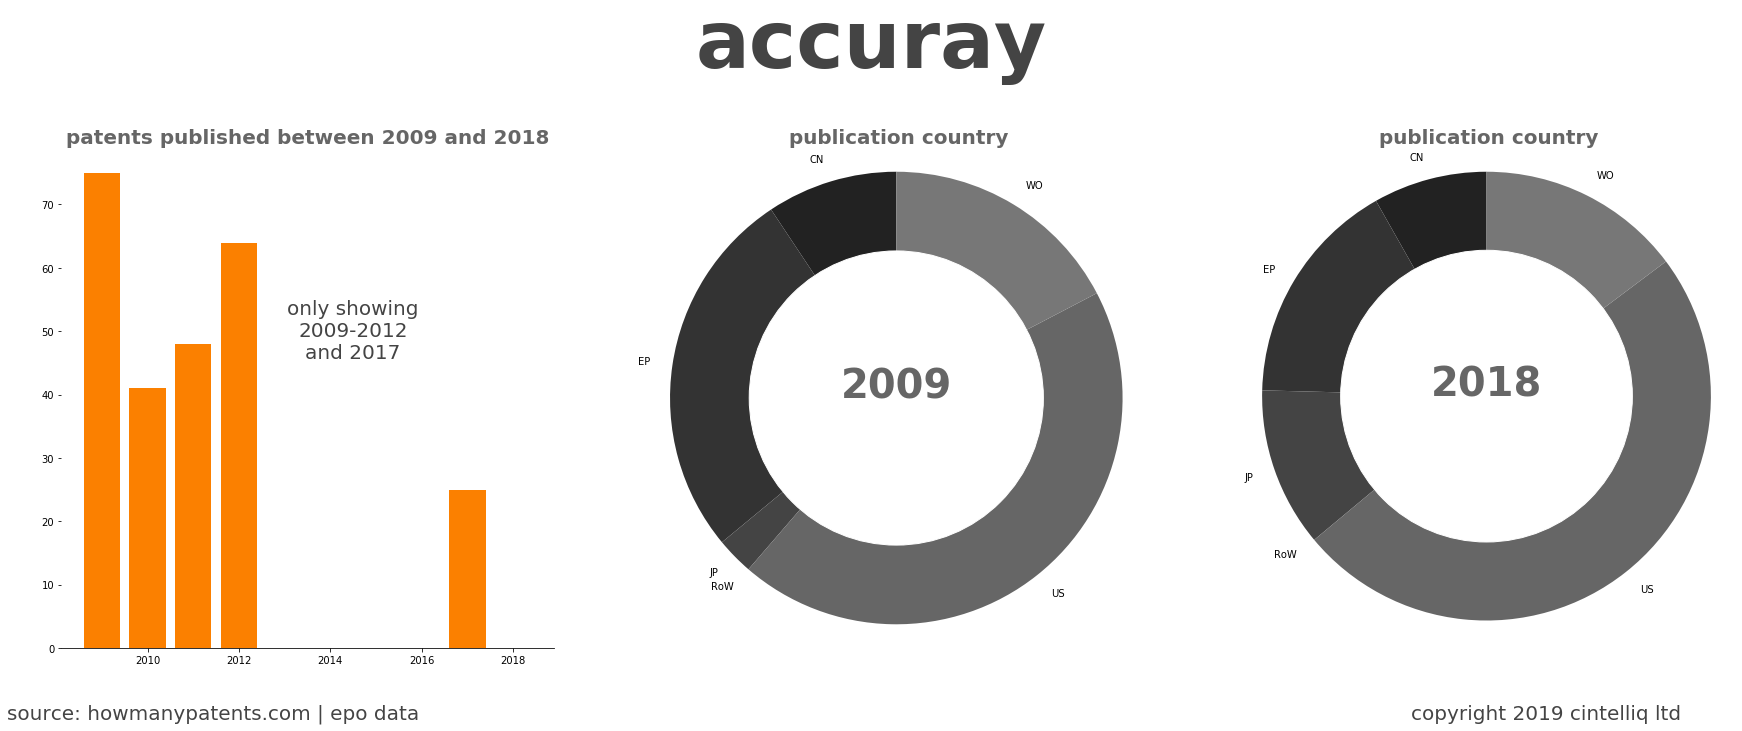 summary of patents for Accuray